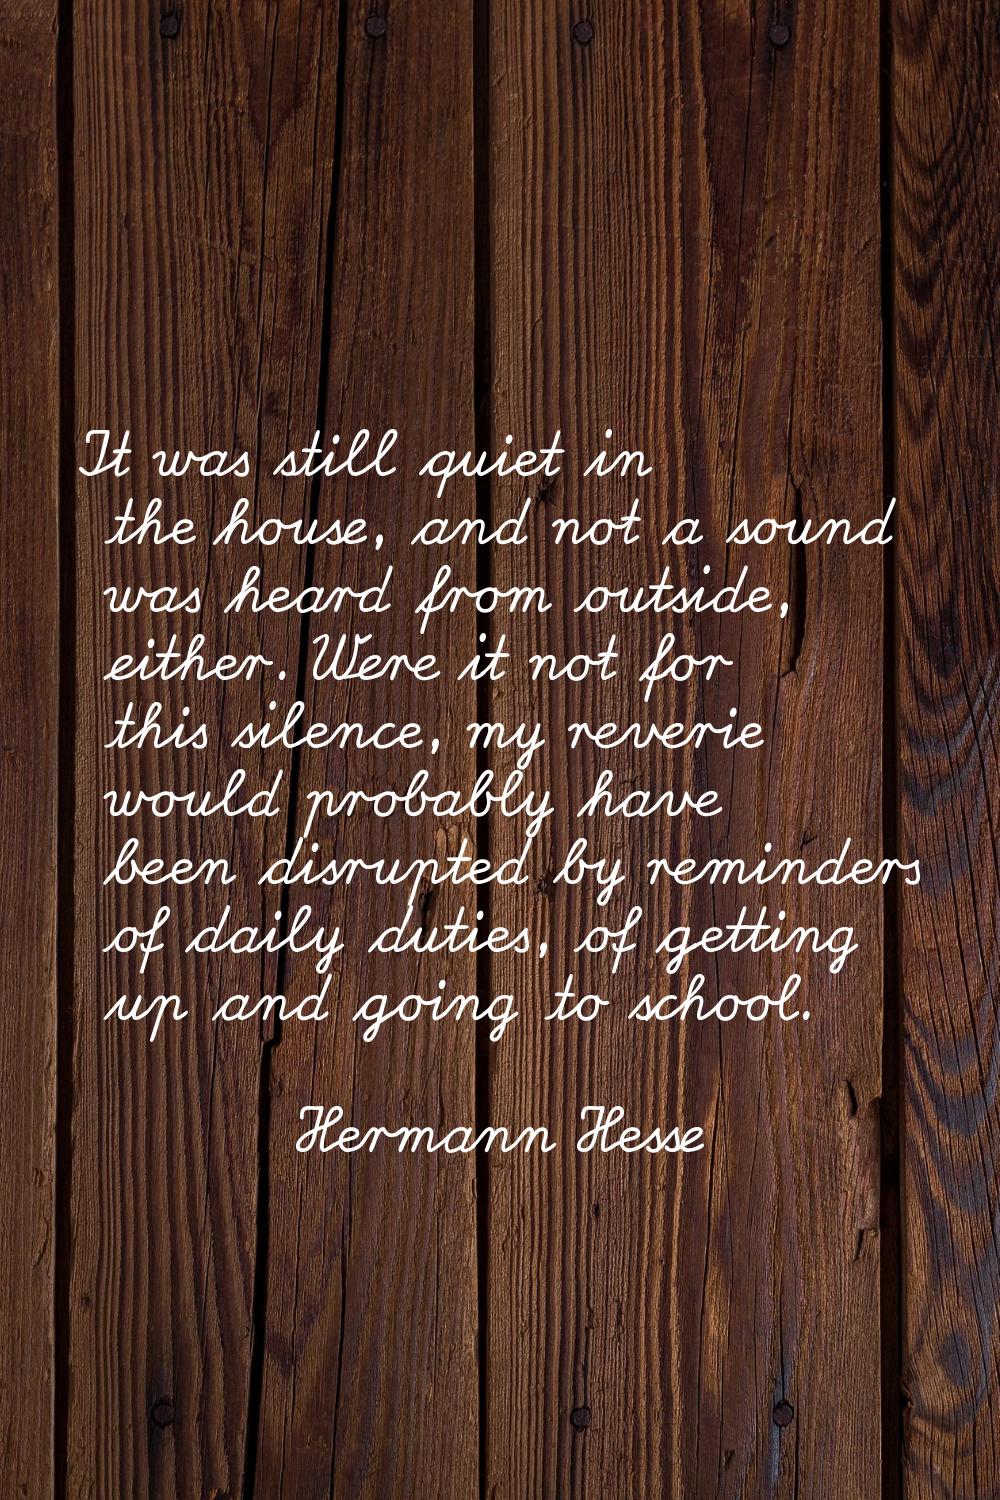 It was still quiet in the house, and not a sound was heard from outside, either. Were it not for th